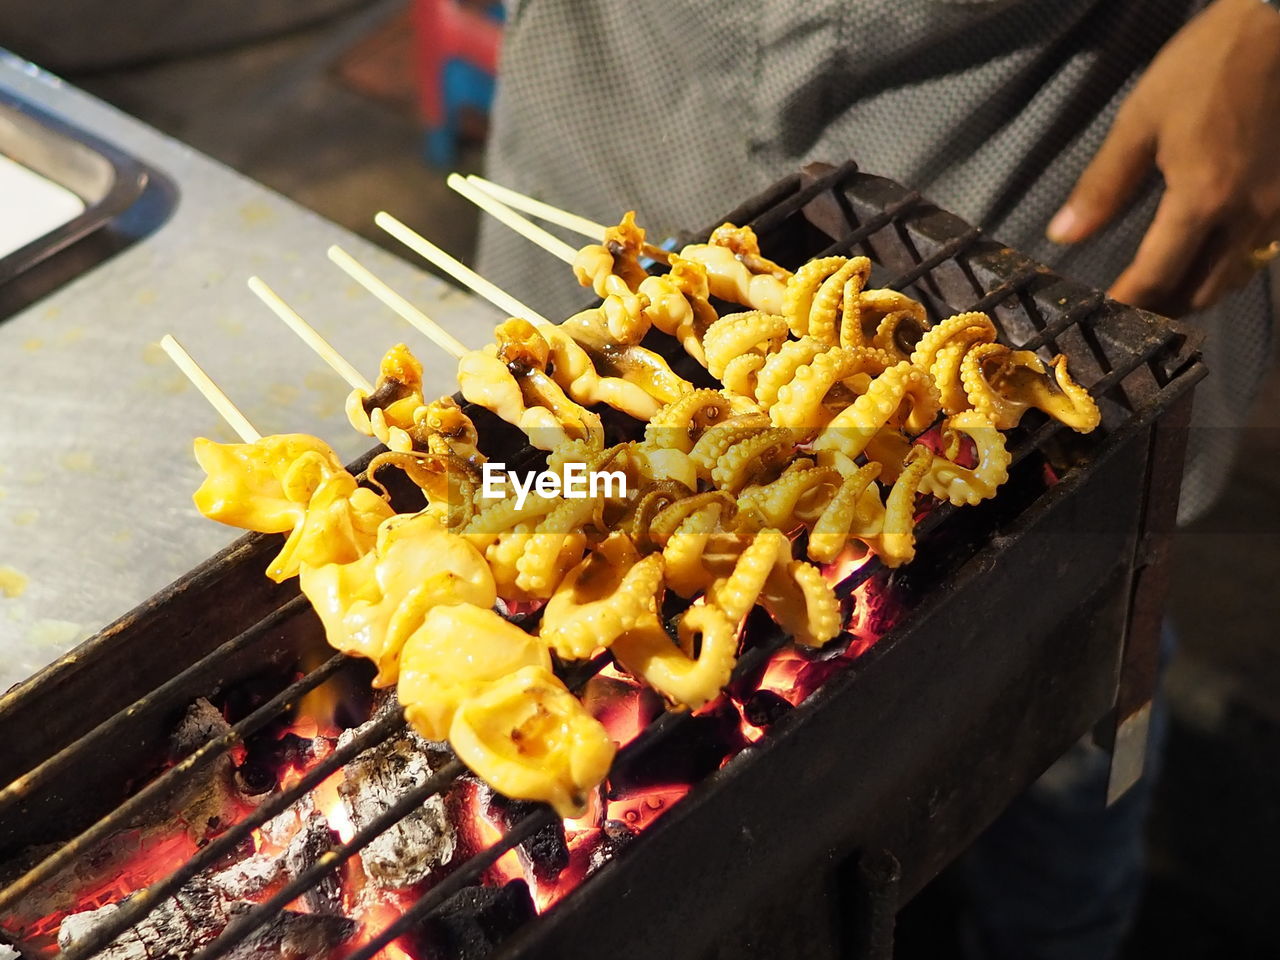 Close-up of person preparing food on barbecue grill